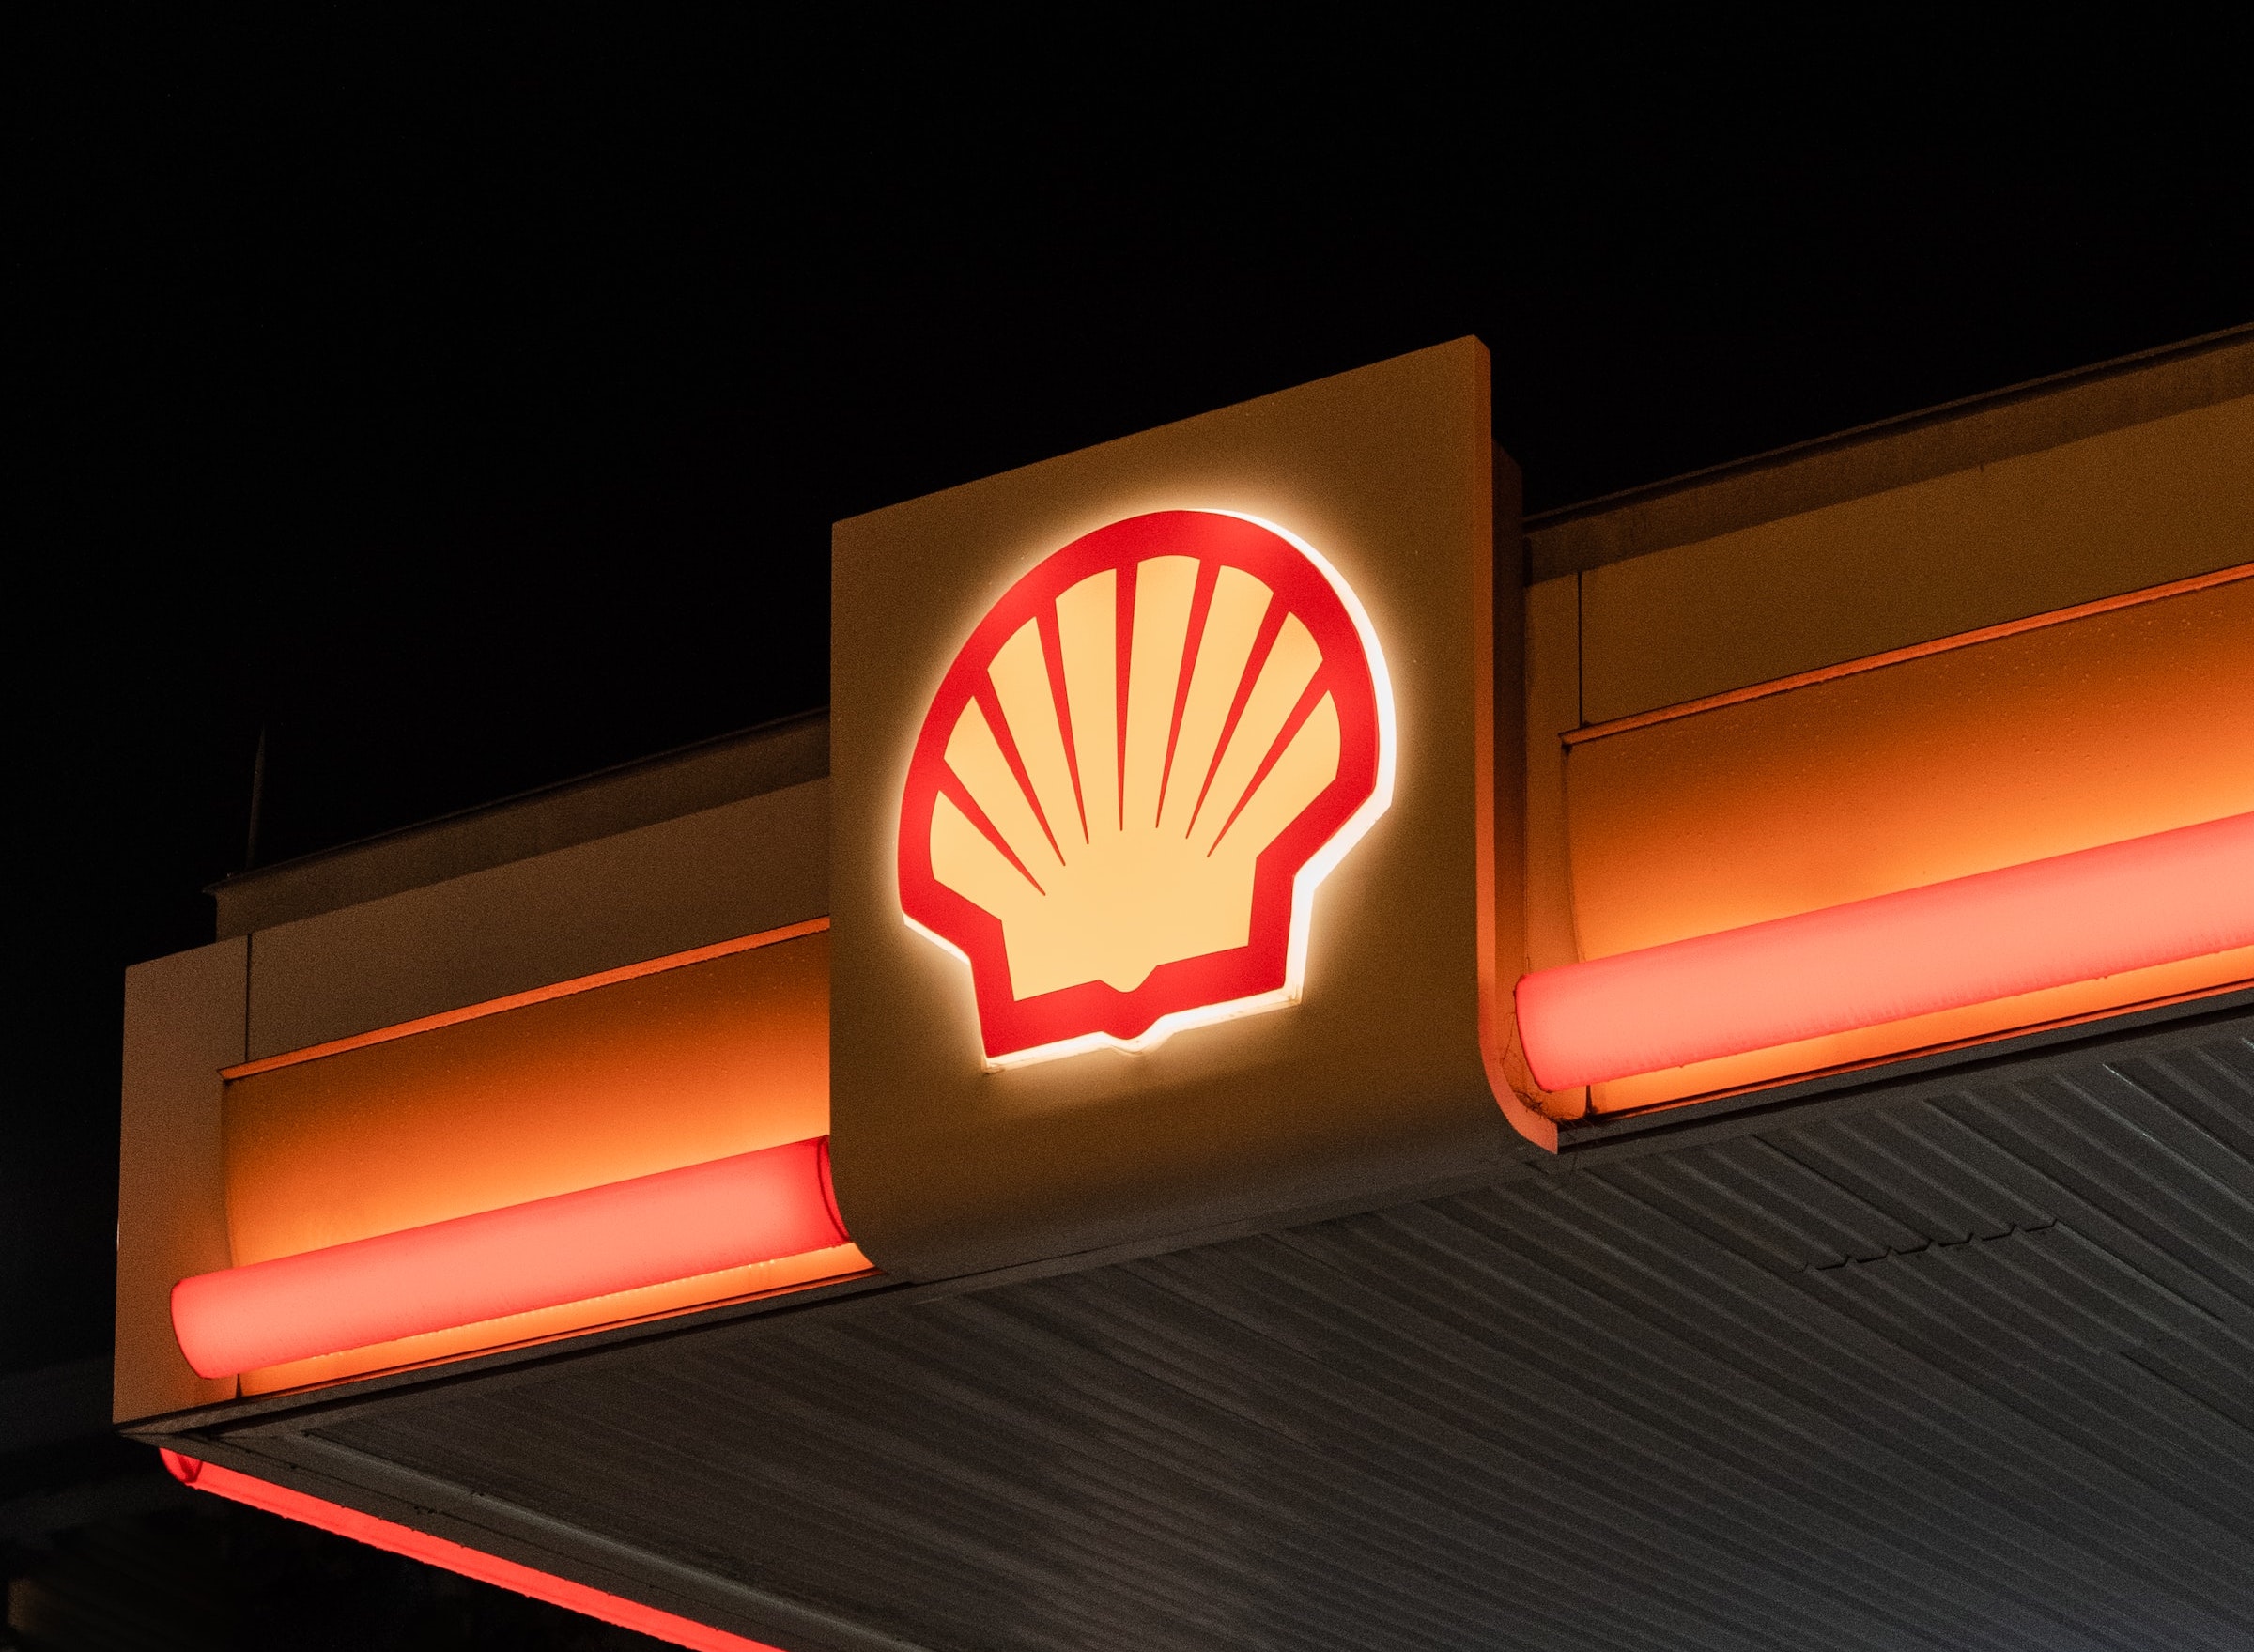 Shell to pay $2bn in UK and EU windfall tax for Q4